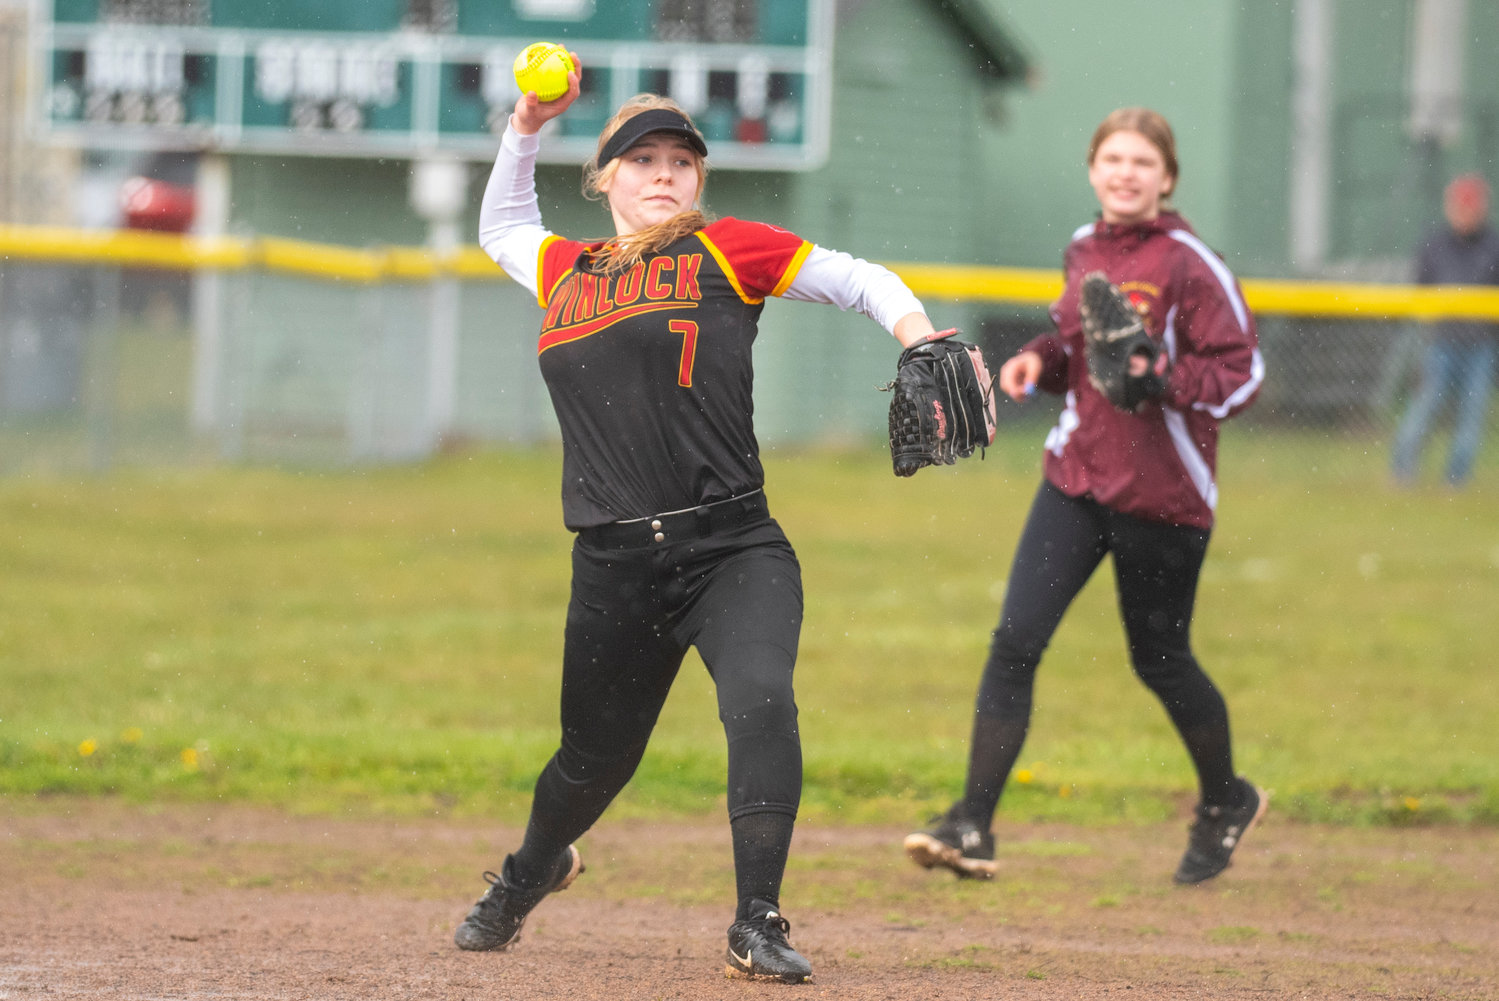 Winlock third baseman Maia Chaney (7) makes a throw to first base after digging a groundball during a home game against Onalaska on Thursday, April 21.